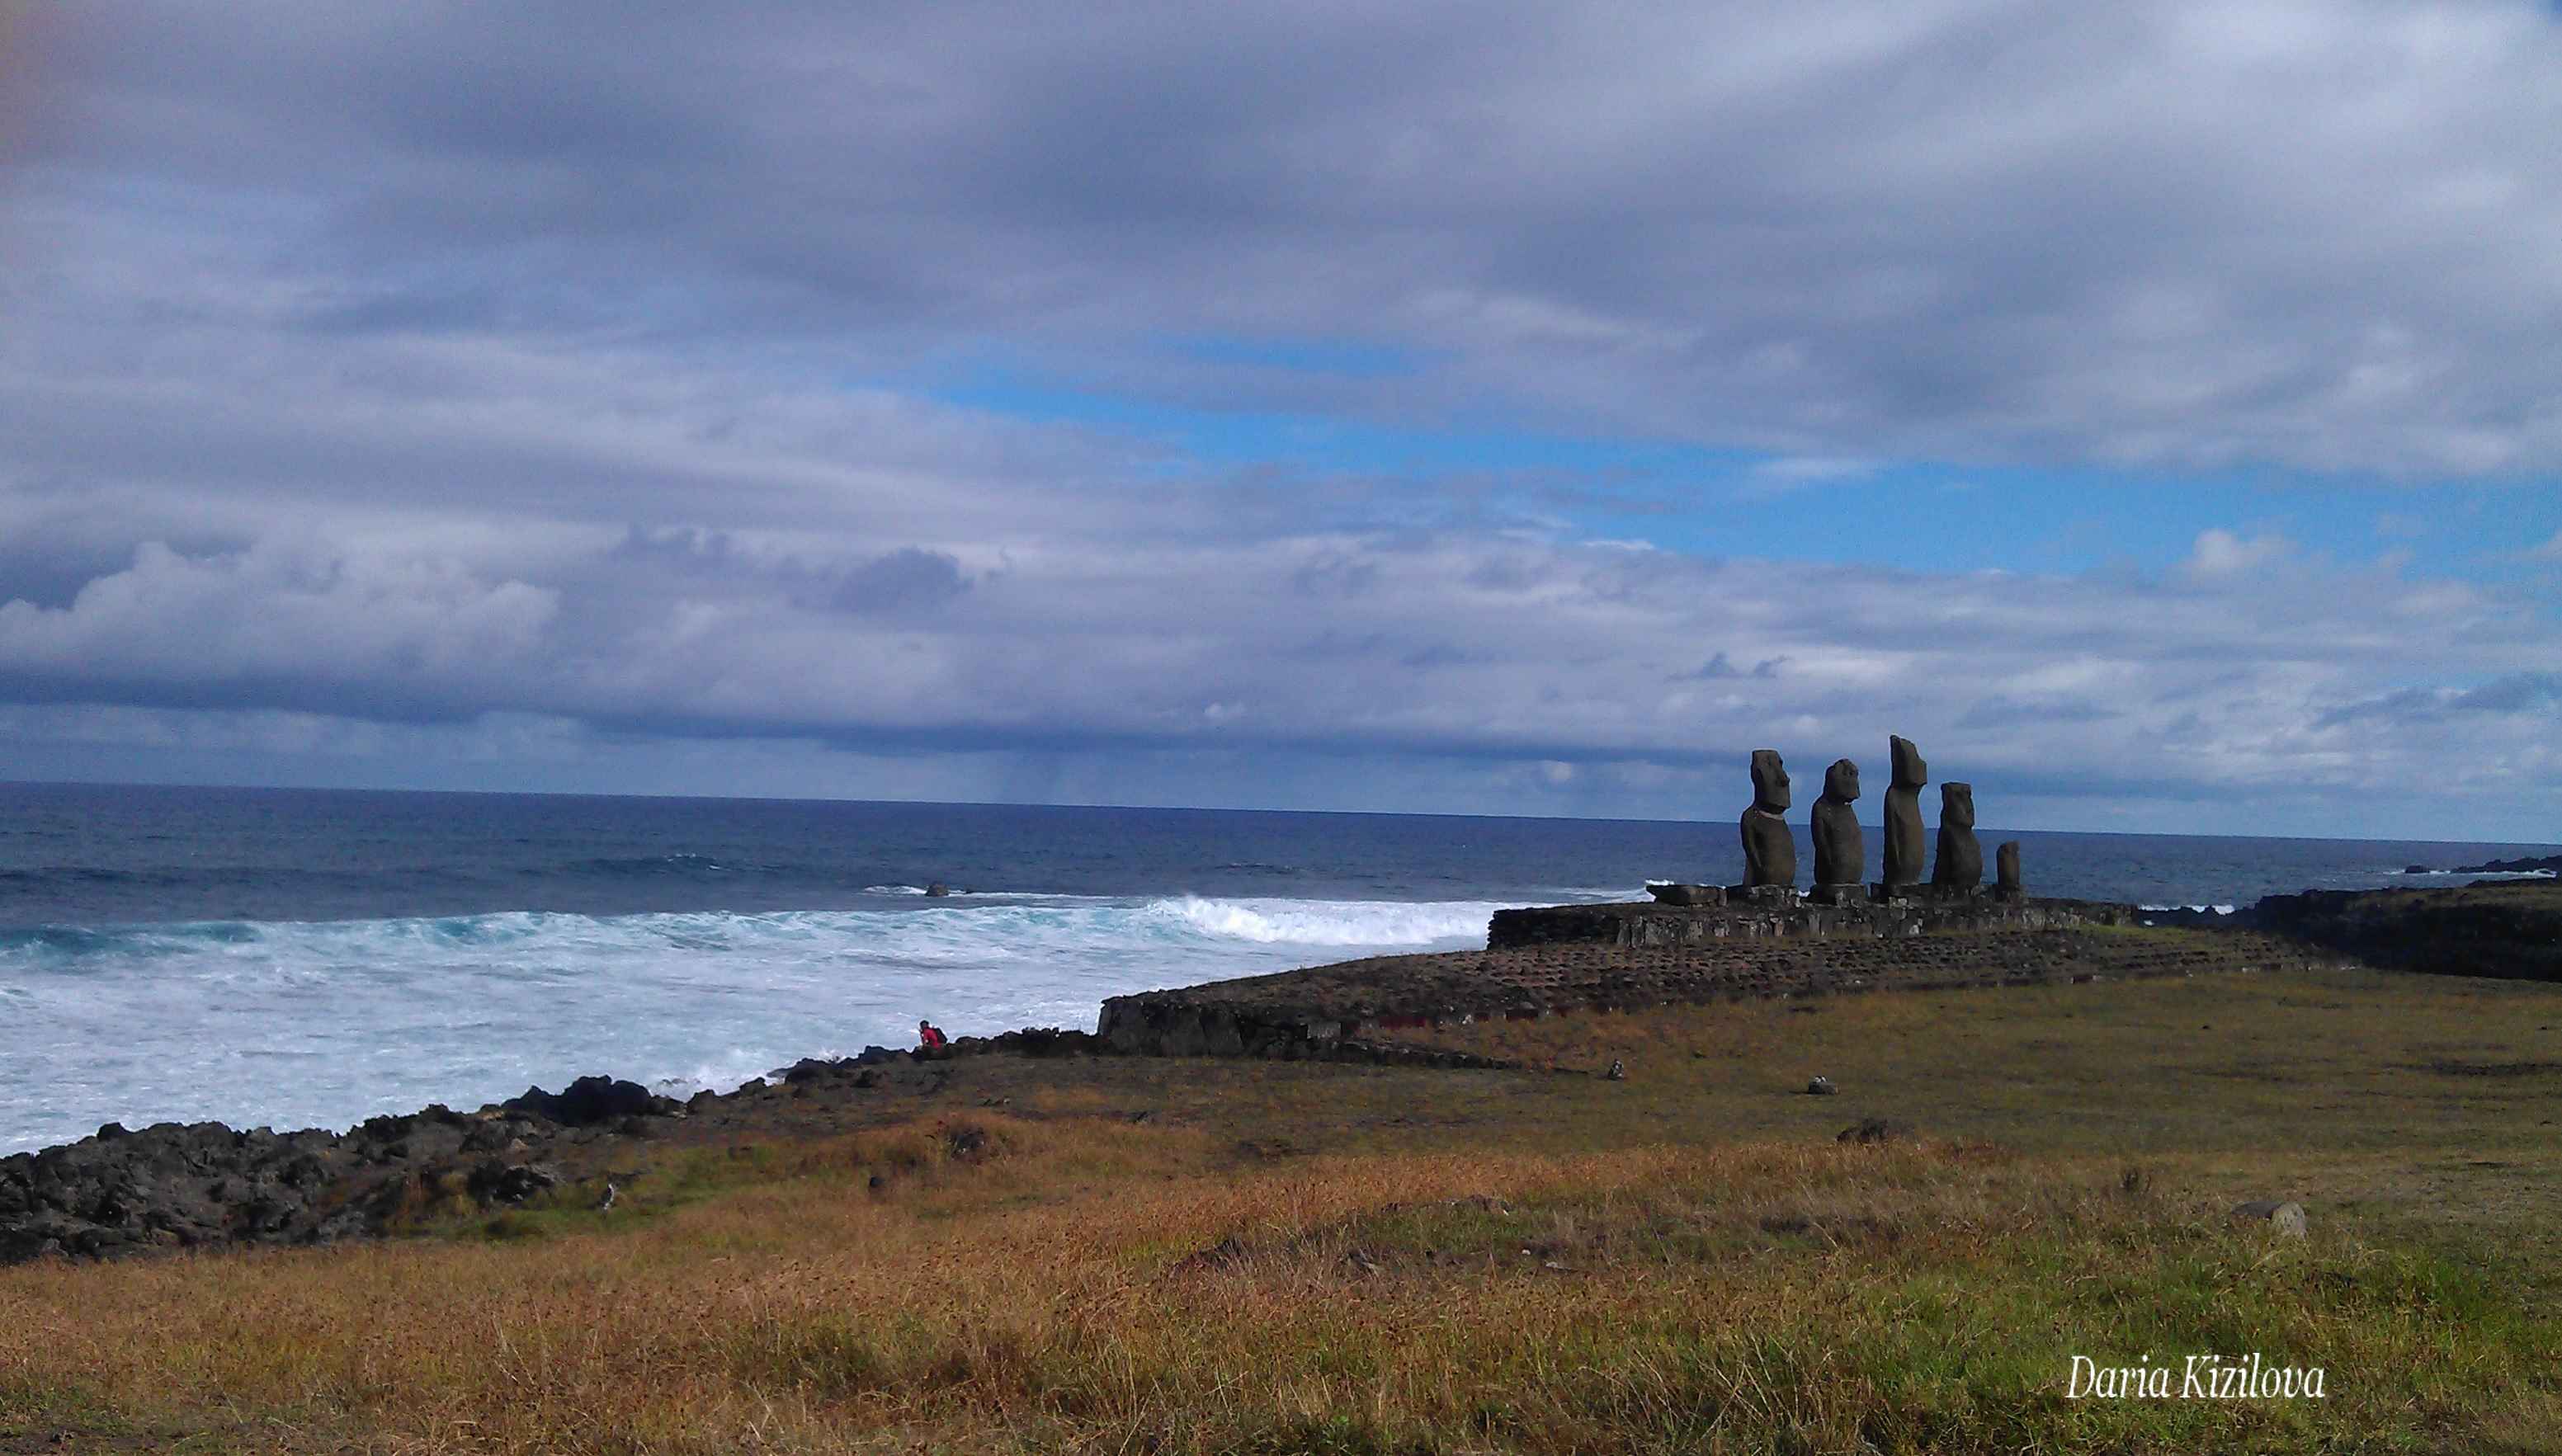 Statues on Easter Island